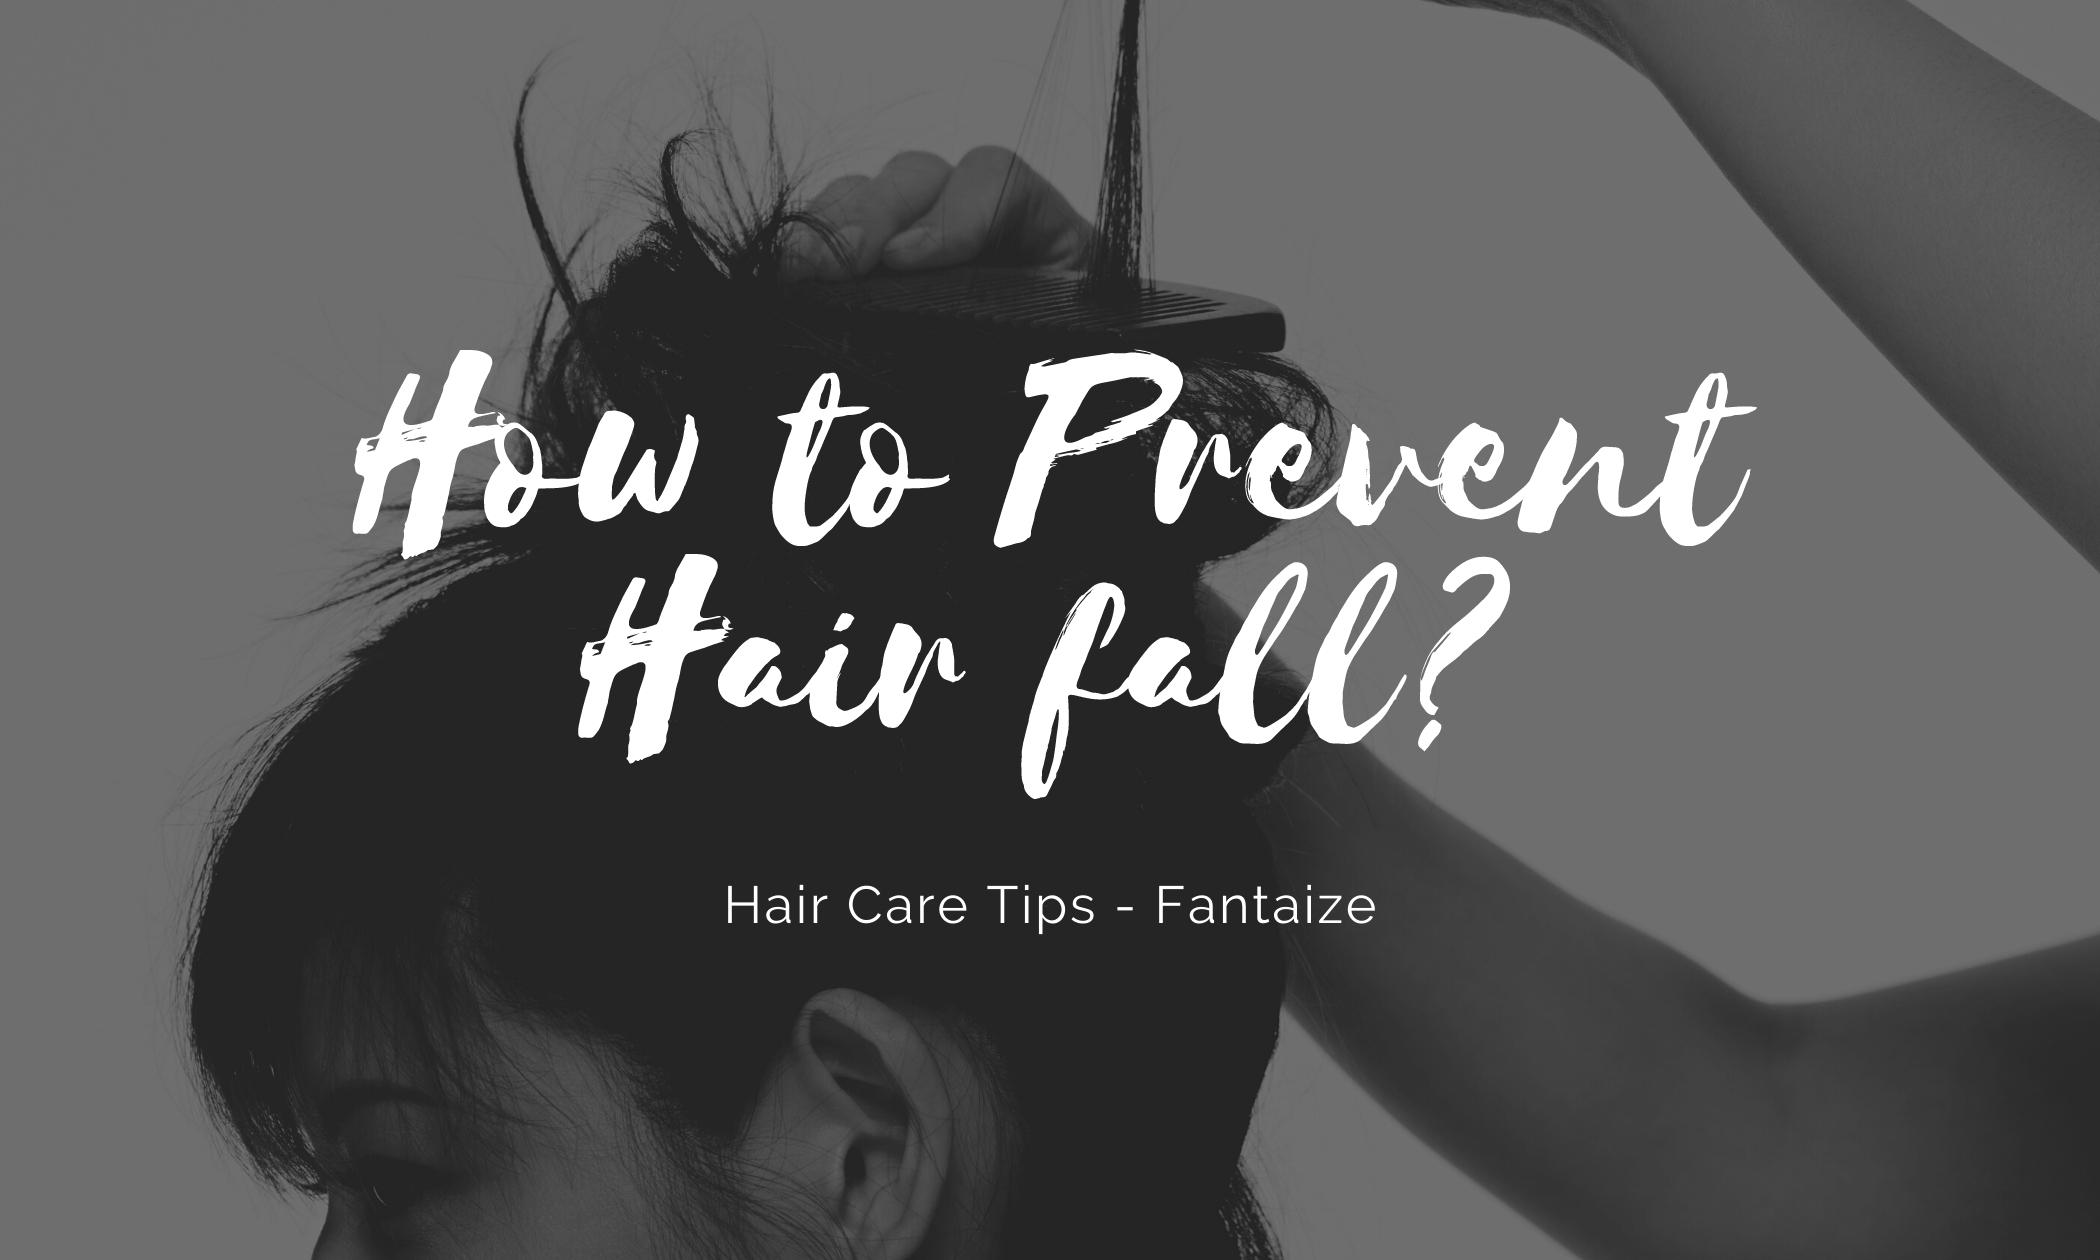 How to Prevent Hair fall? - Fantaize Beauty and Health Gallery